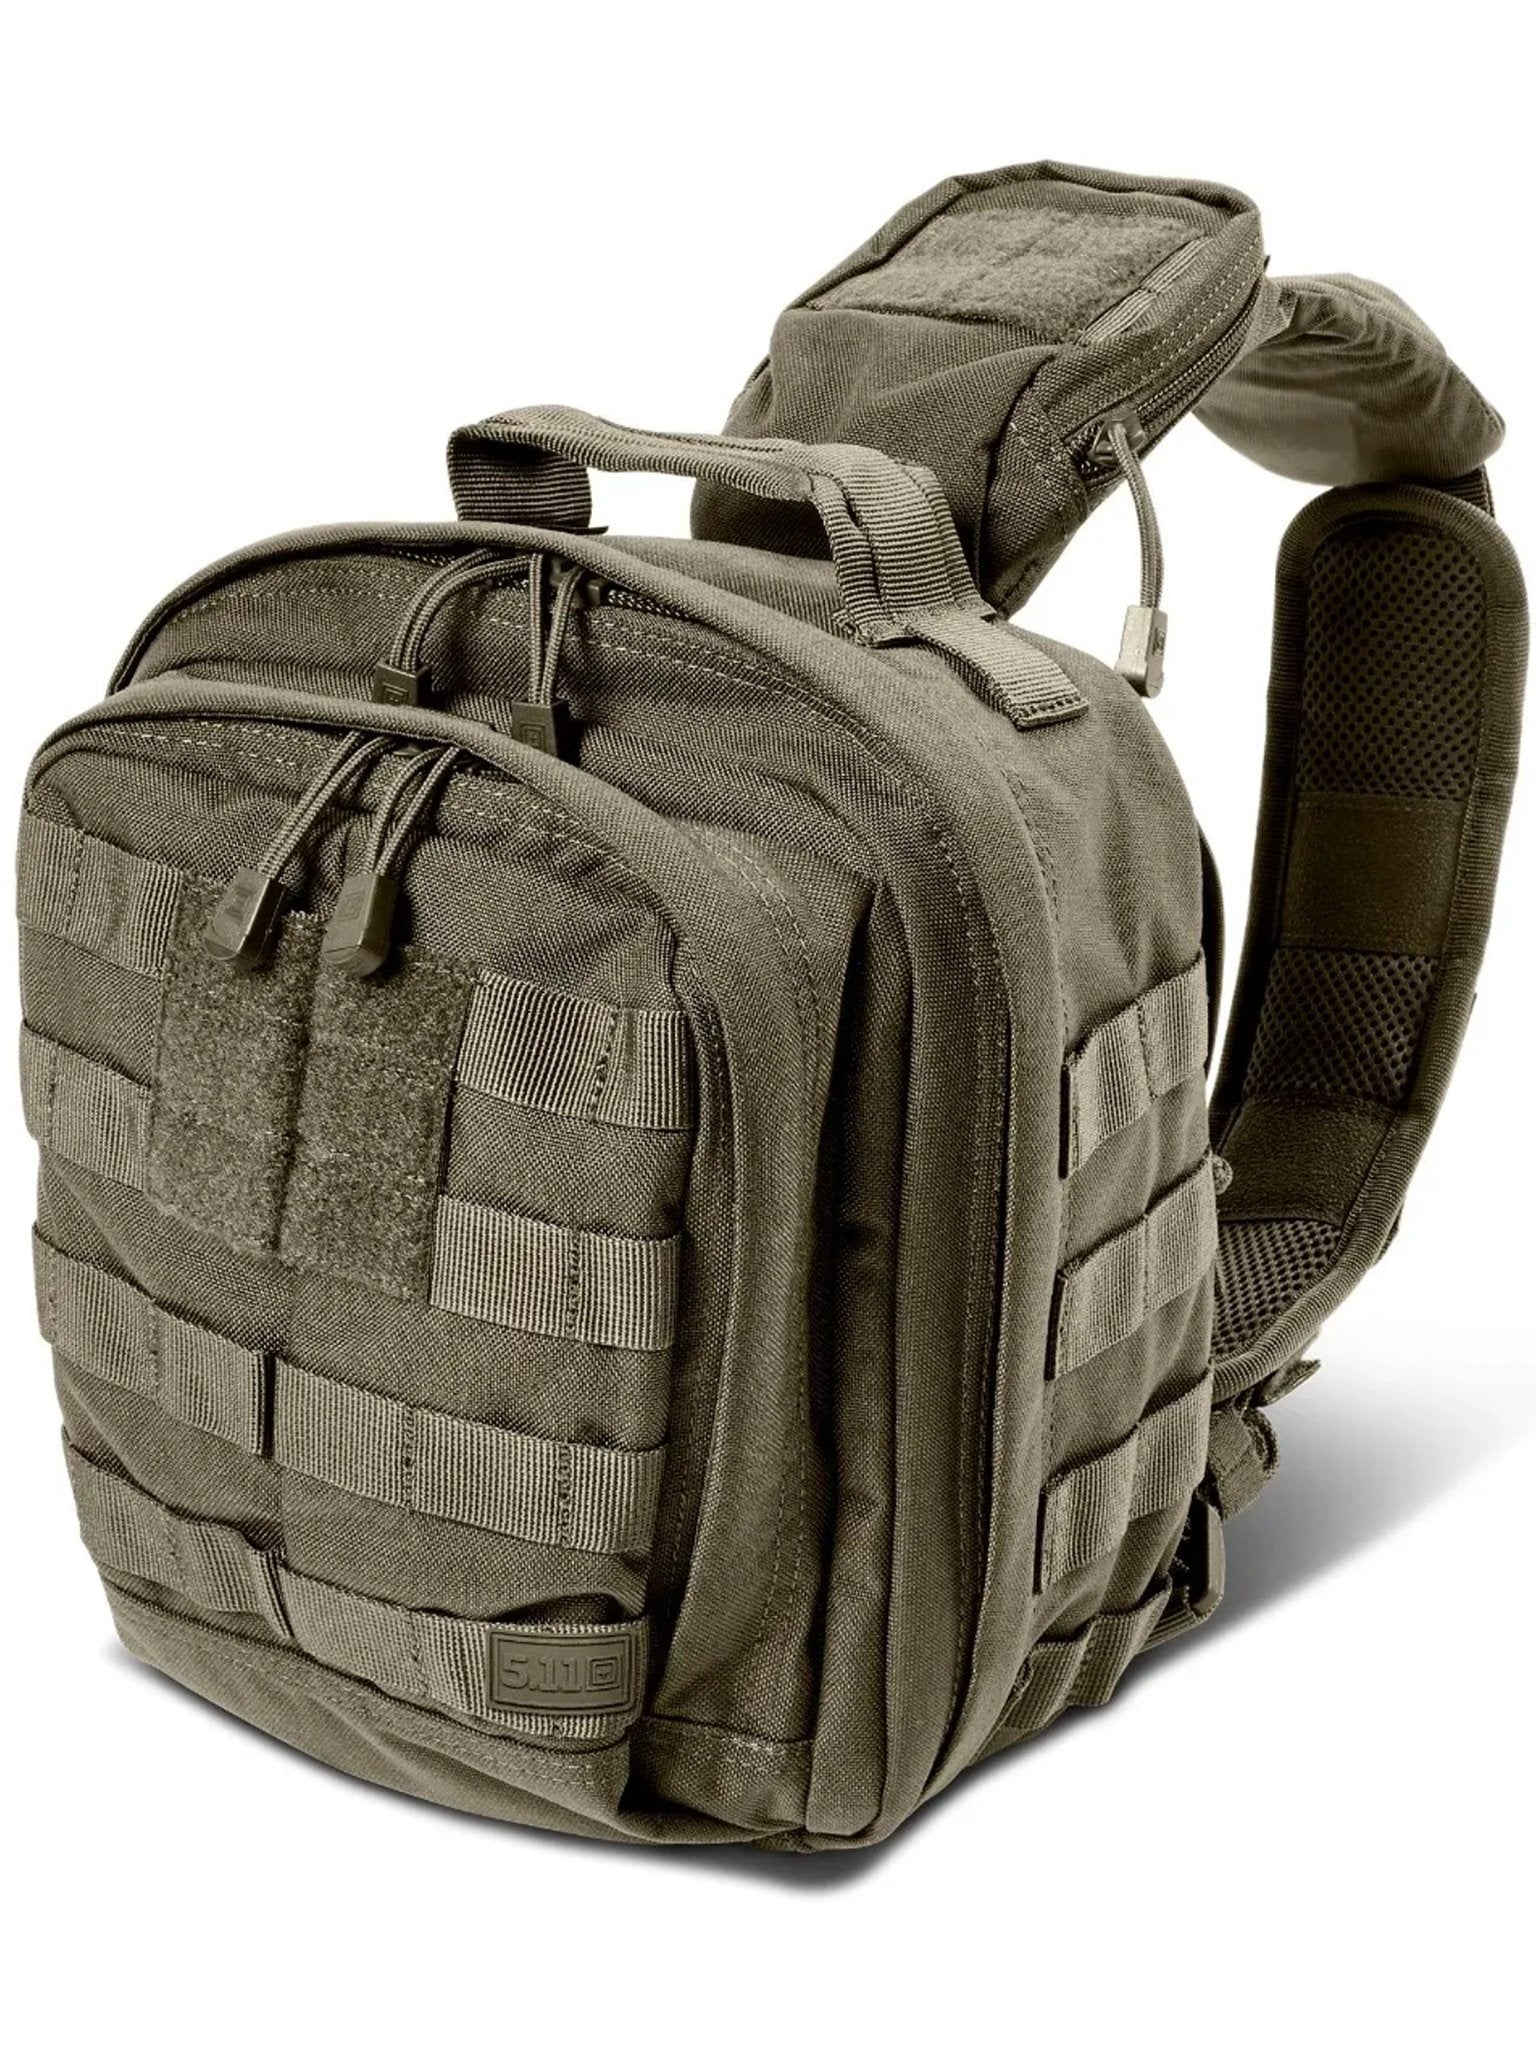 4elementsclothing5.11 Tactical5.11 Tactical - 5.11 Tactical MOAB™ 6 SLING PACK 11L - Style 56963Bag56963-186